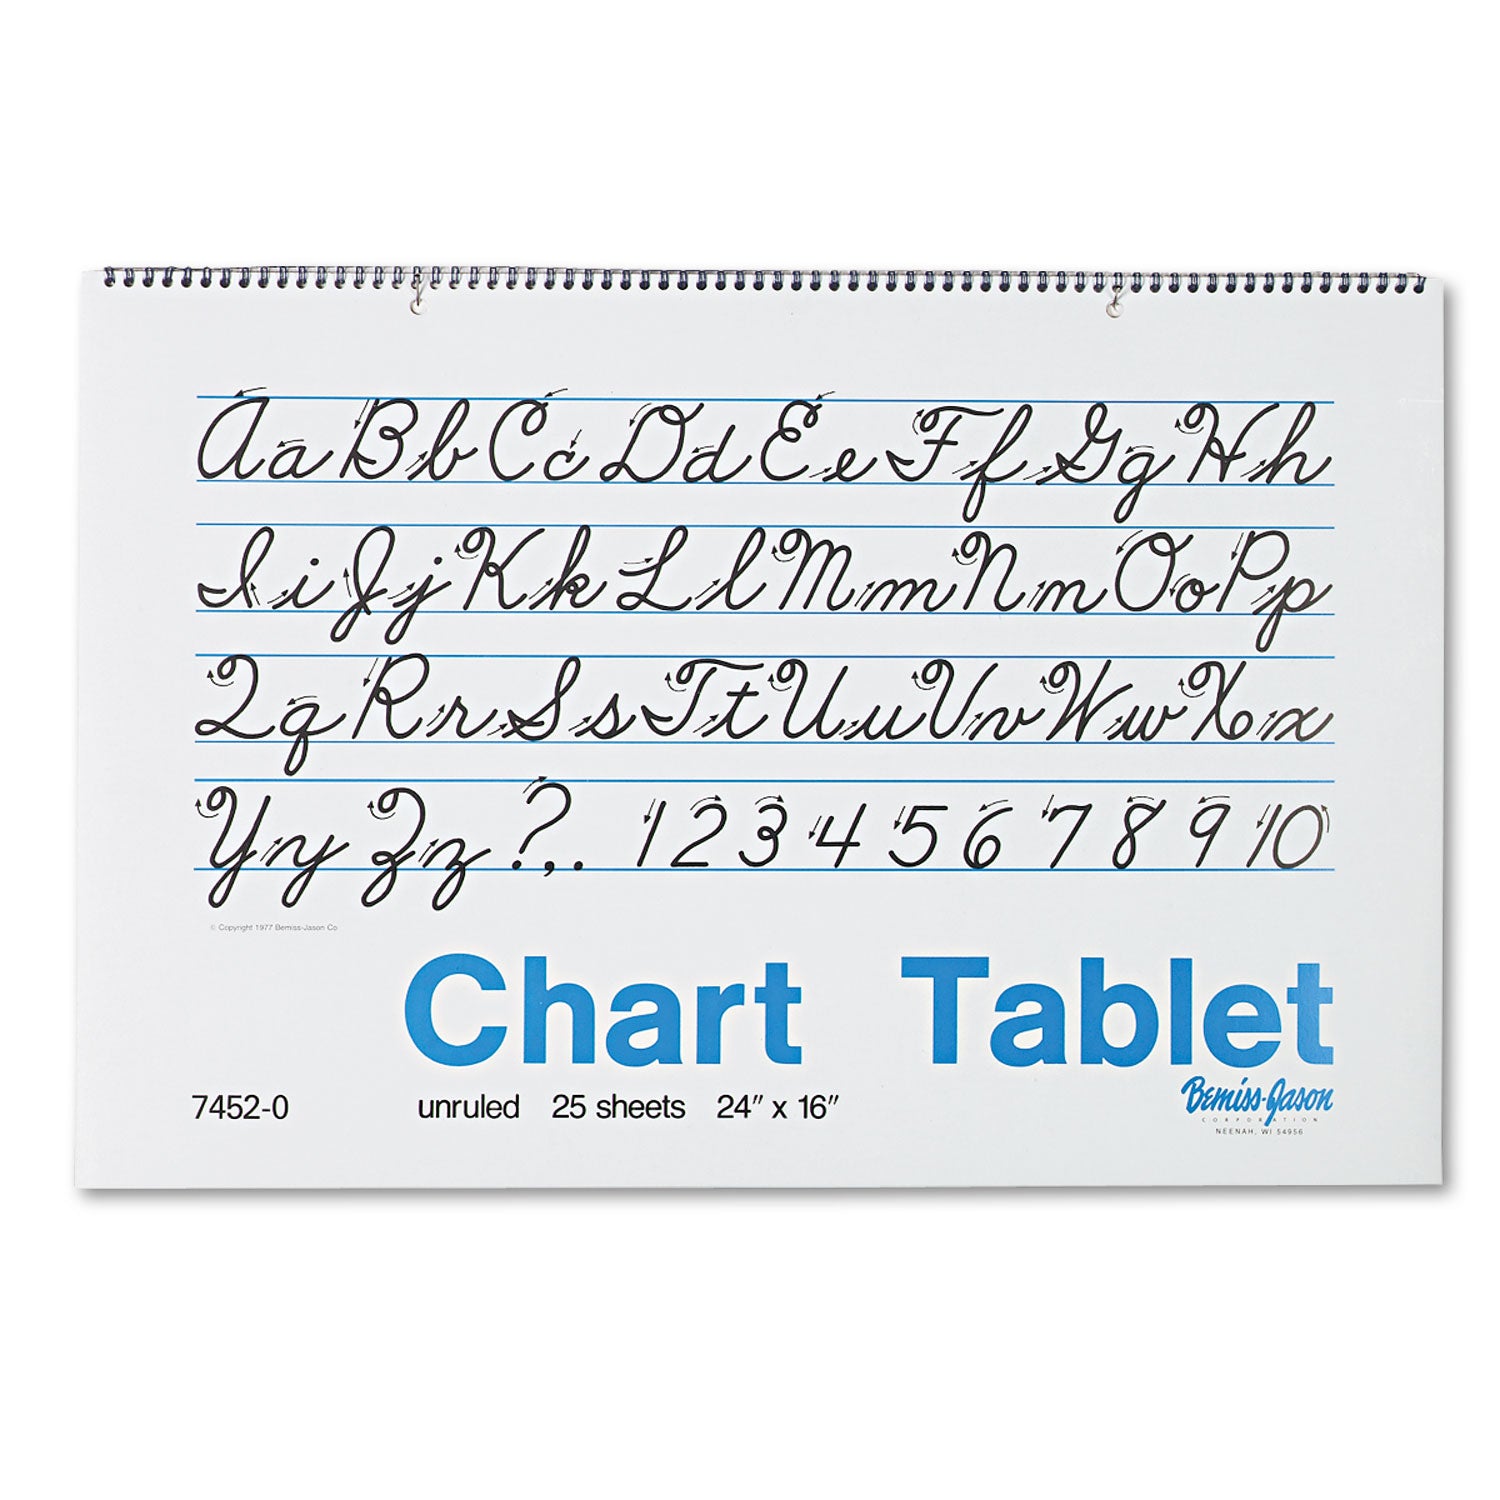 Chart Tablets, Unruled, 24 x 16, White, 25 Sheets - 